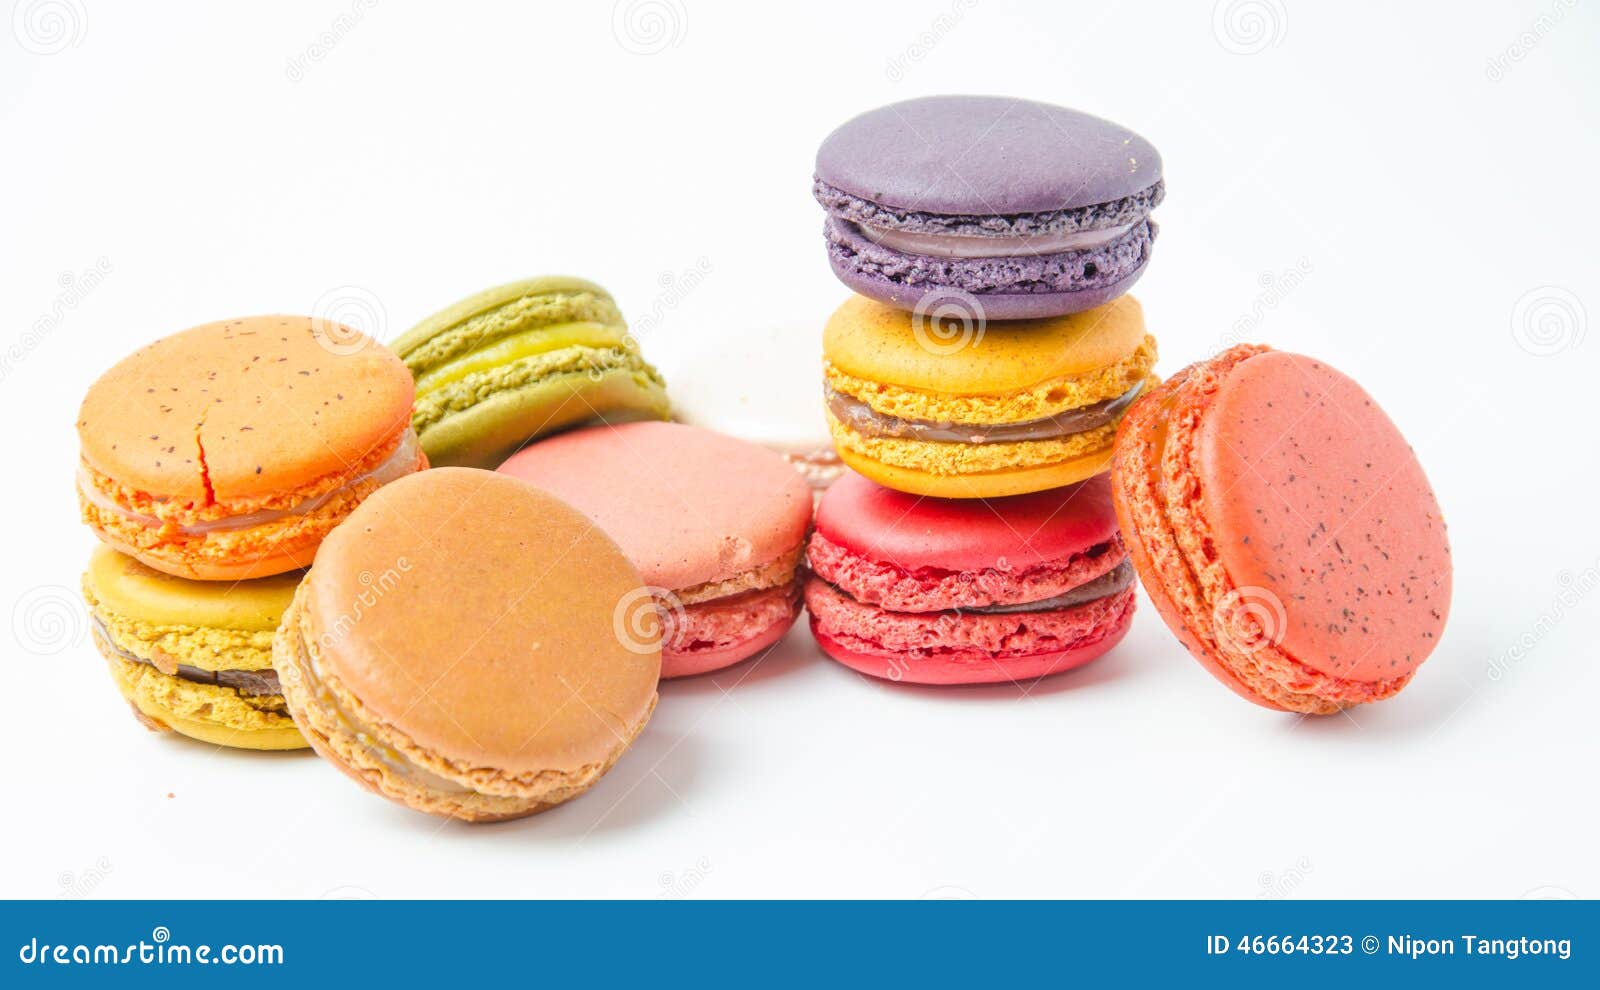 Colorful of Macaroons on White Background Stock Image - Image of ...